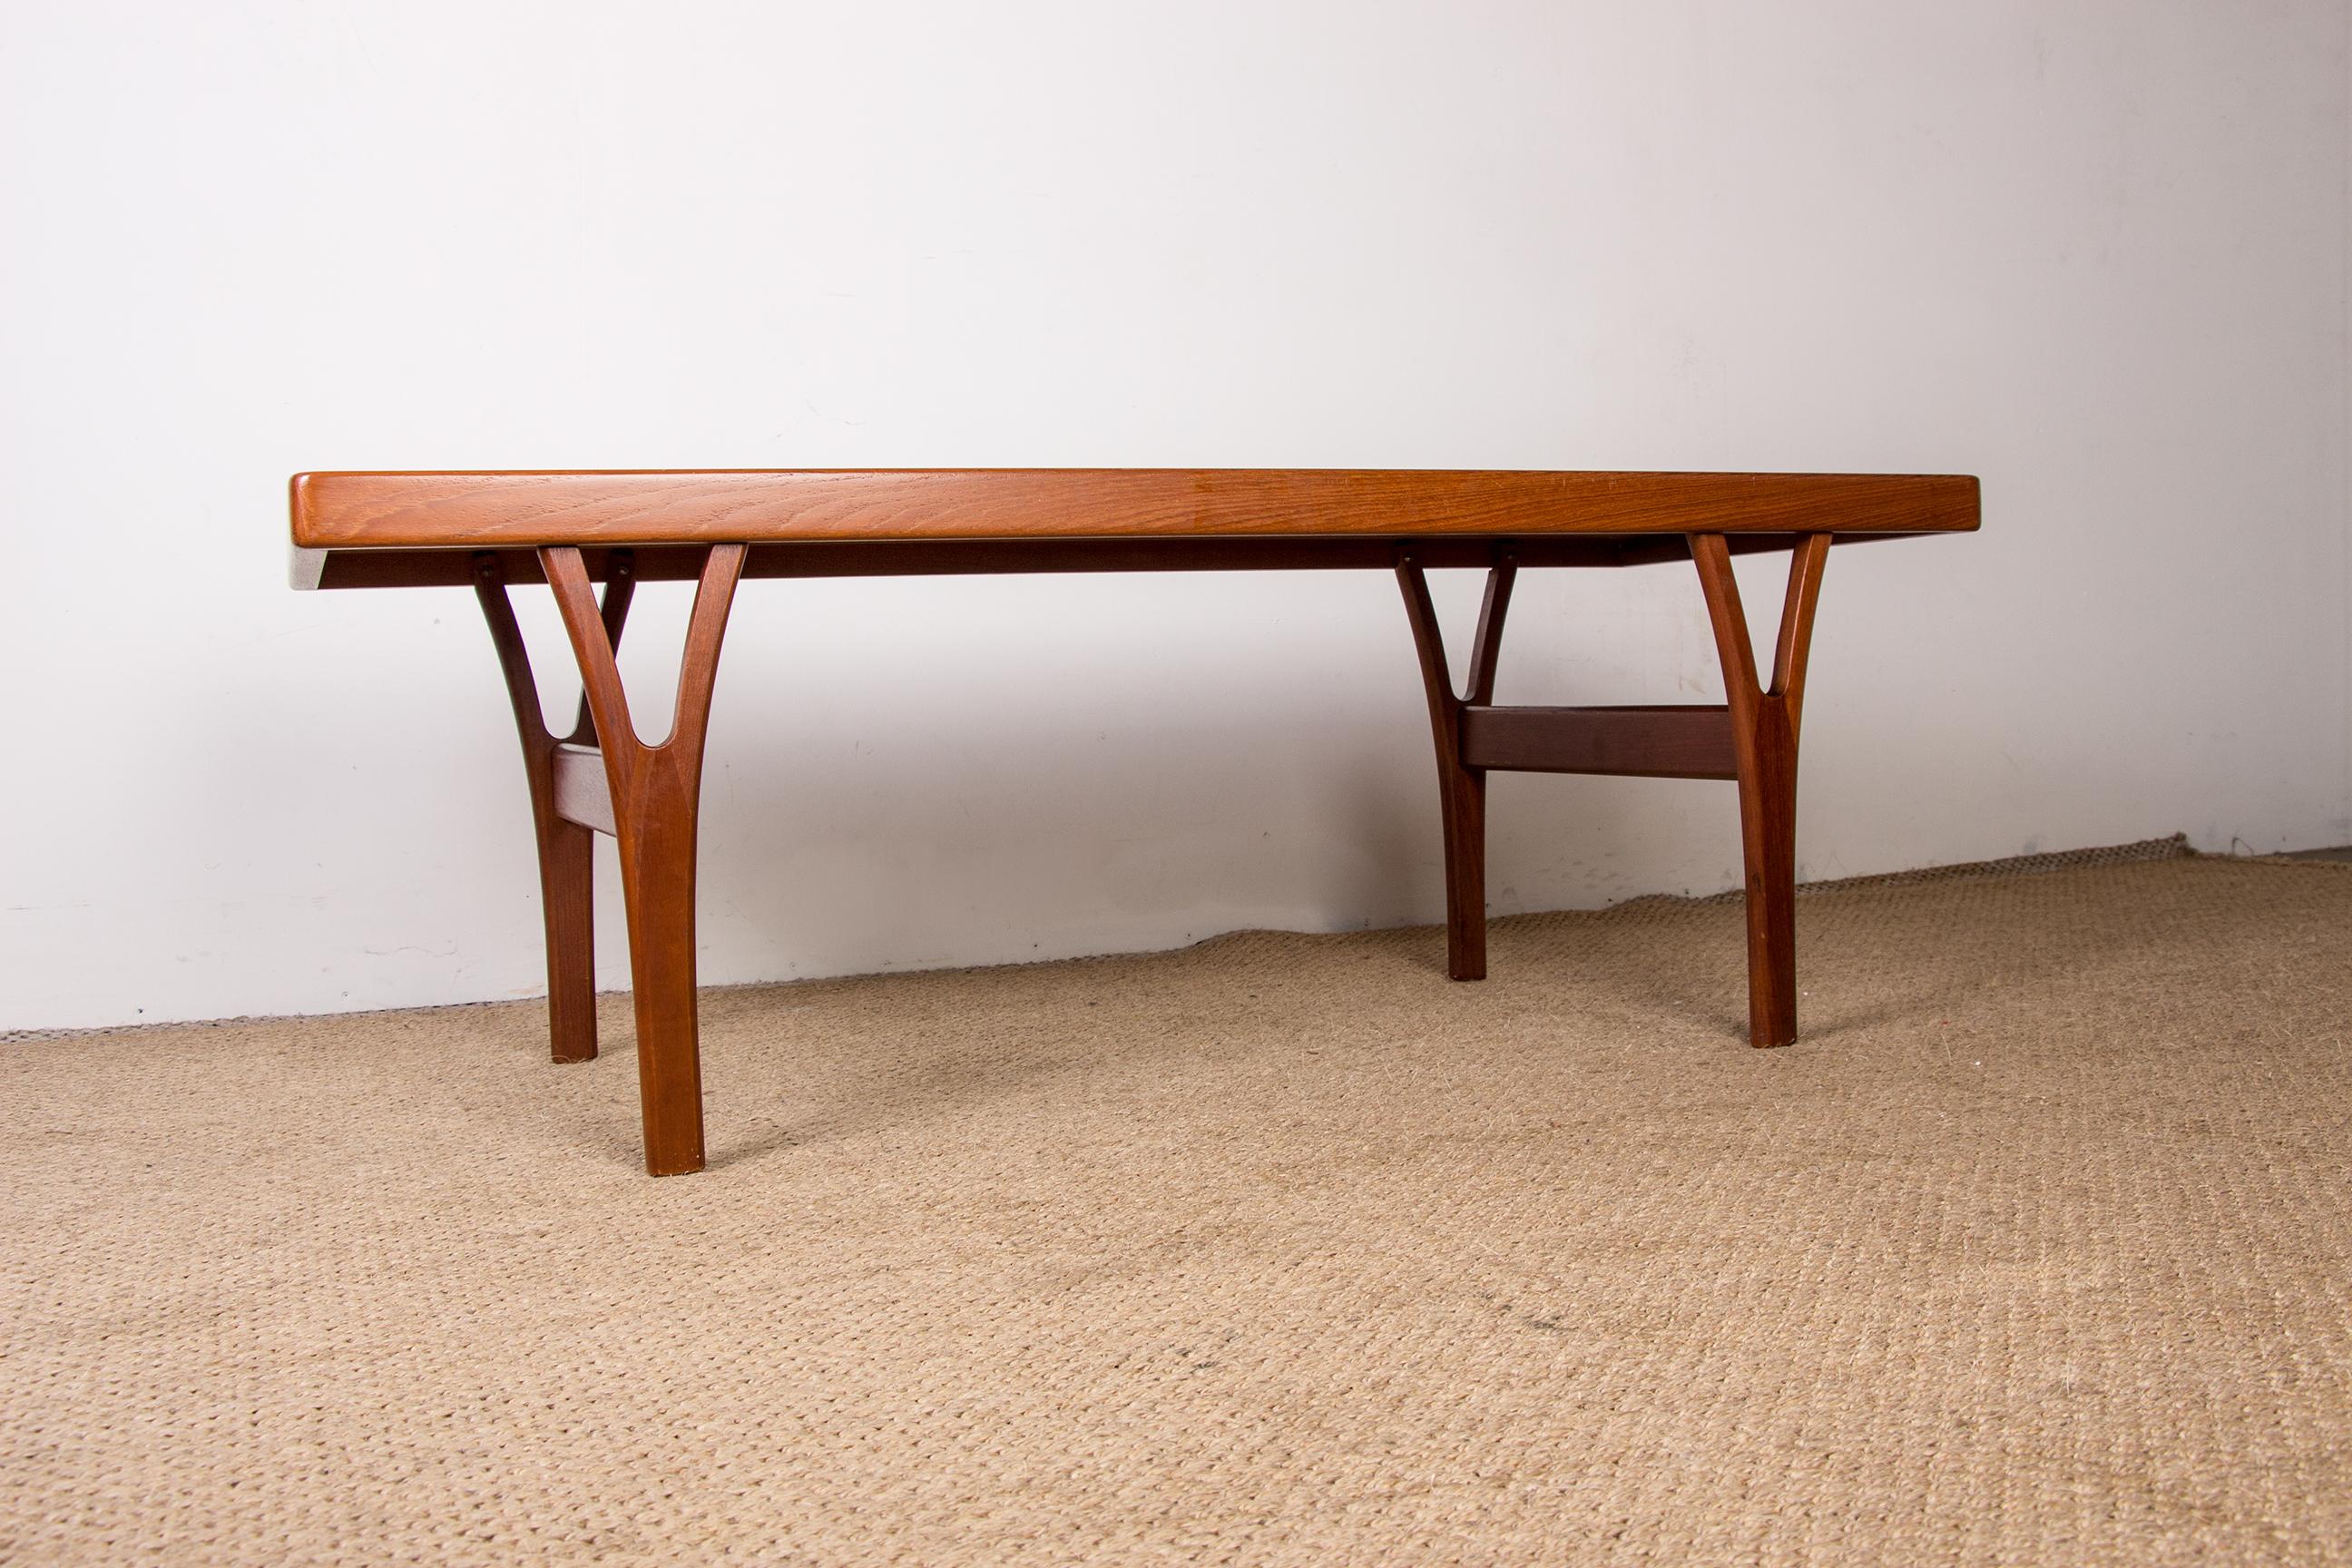 Beautiful Scandinavian coffee table, with its double Y base connected by spacers, it offers an elegant and very sober design. Very good build quality.